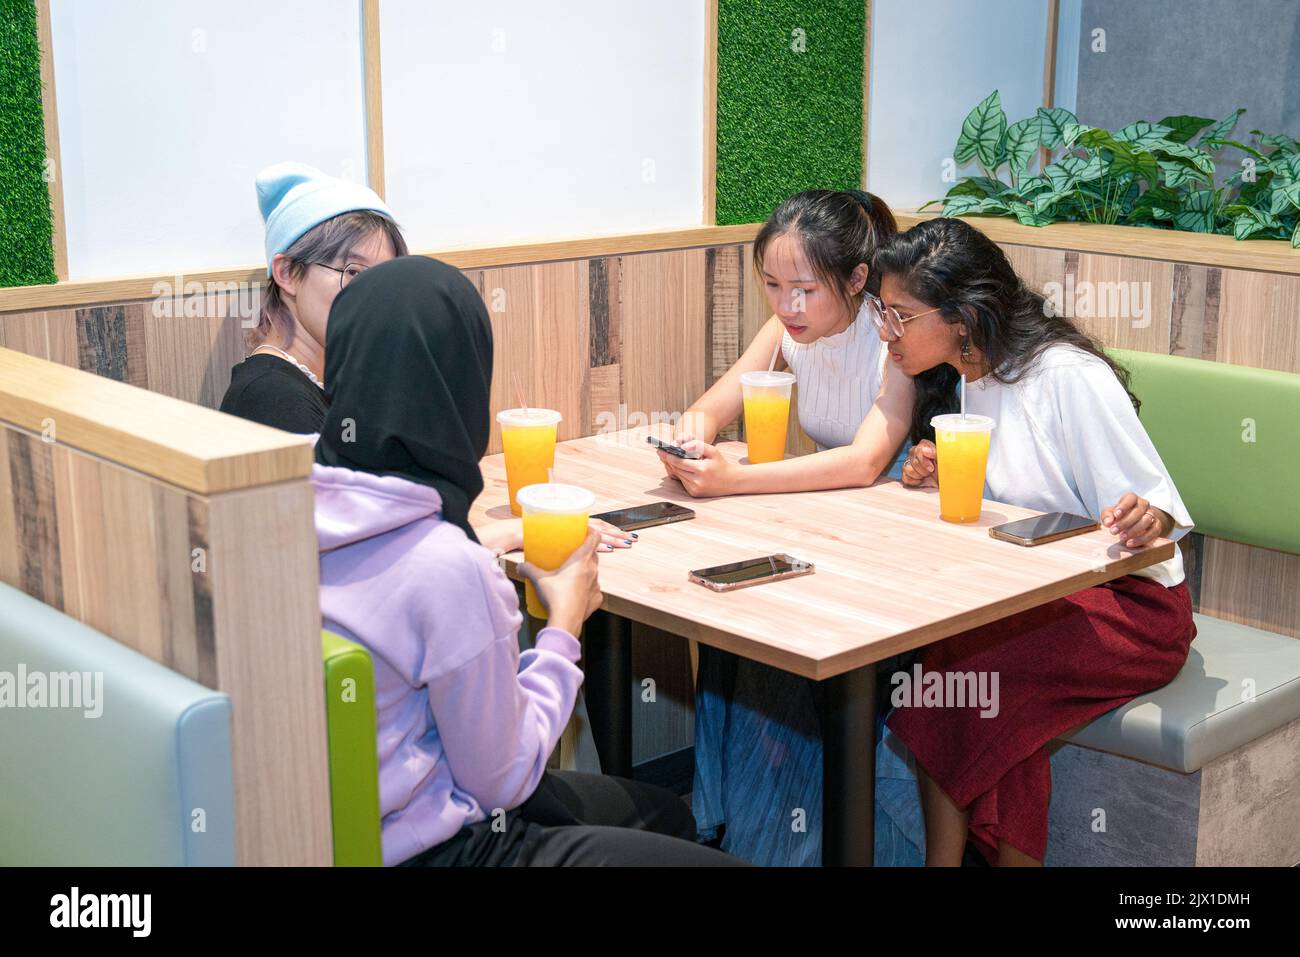 Young Asian women having a great time in a cafe. Drinking orange juice and socializing. Stock Photo